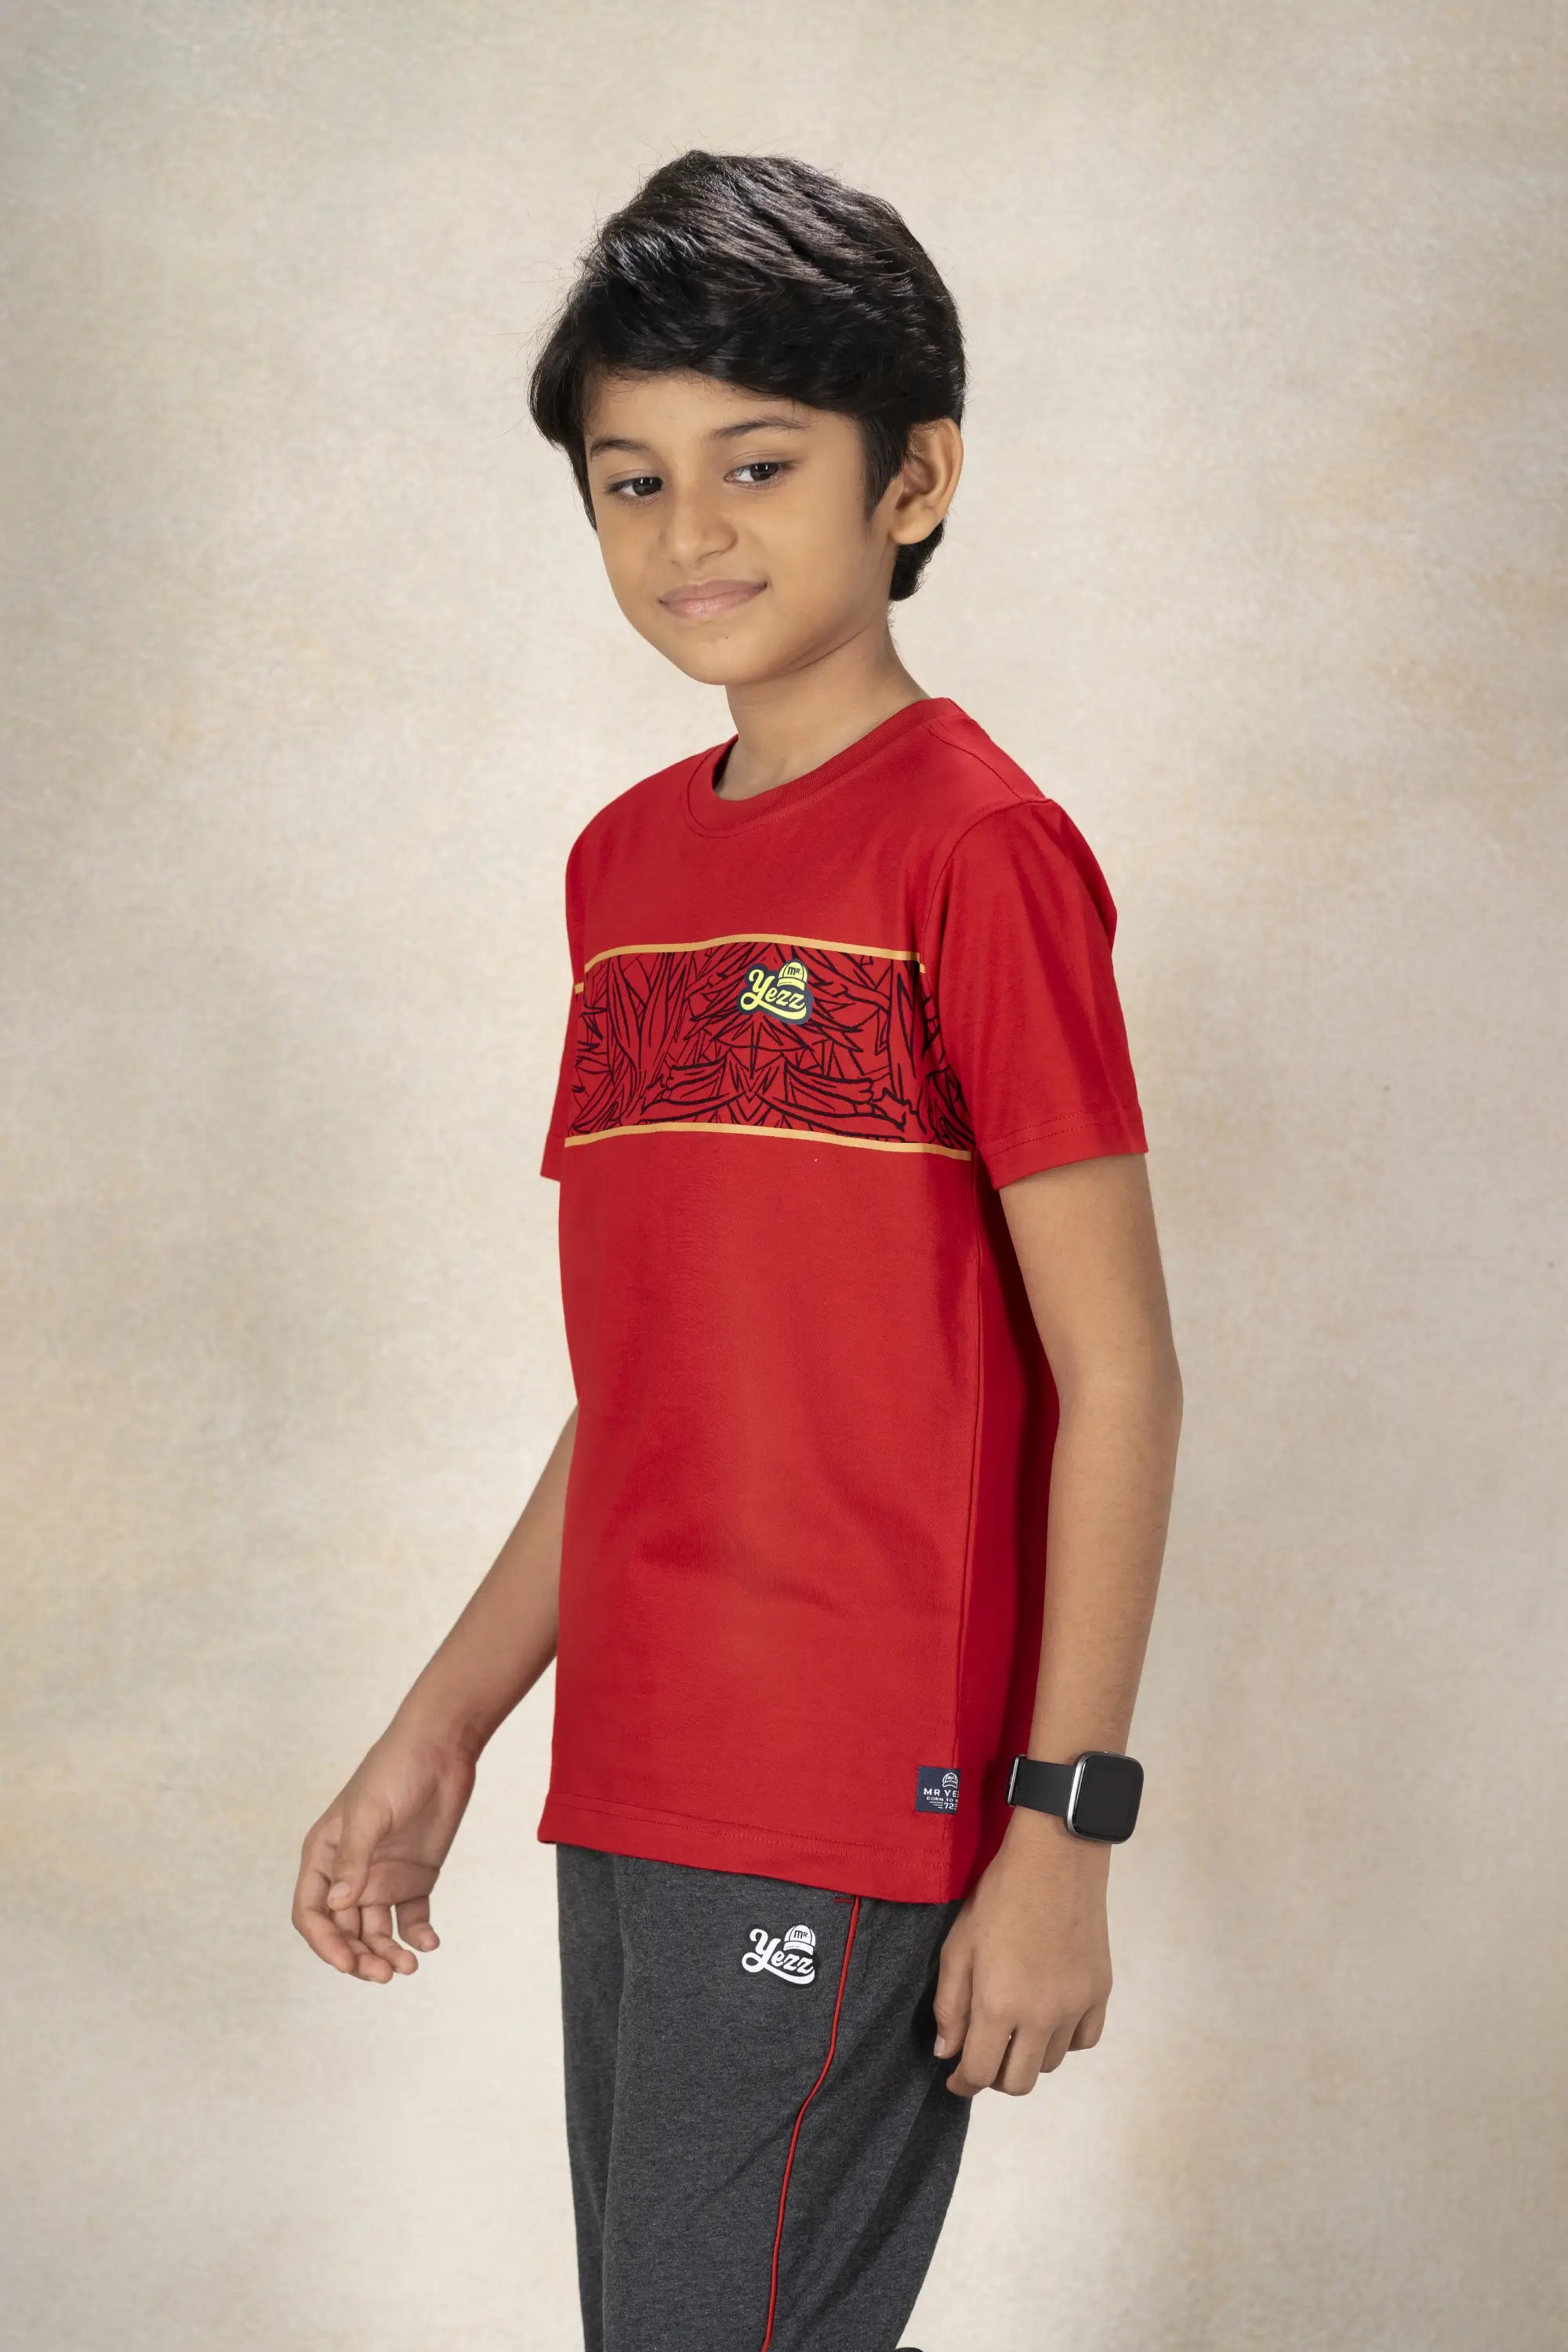 Boys Round Neck Cut and Sew T-Shirt MR YEZZ #color_Spiced Red